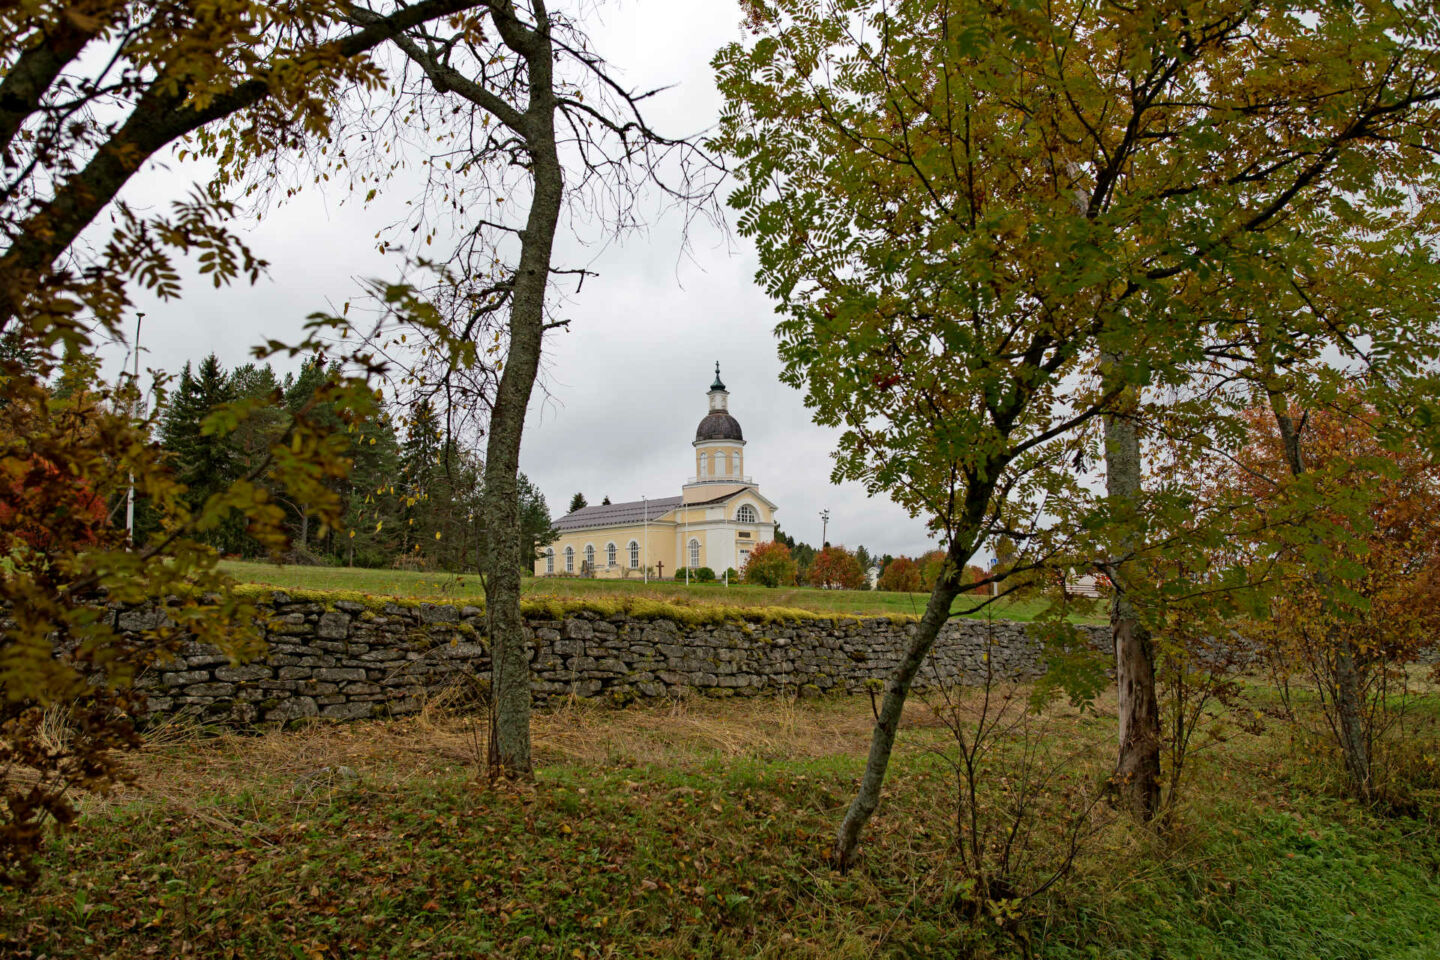 The old church in Keminmaa, a nature retreat destination in Finnish Lapland